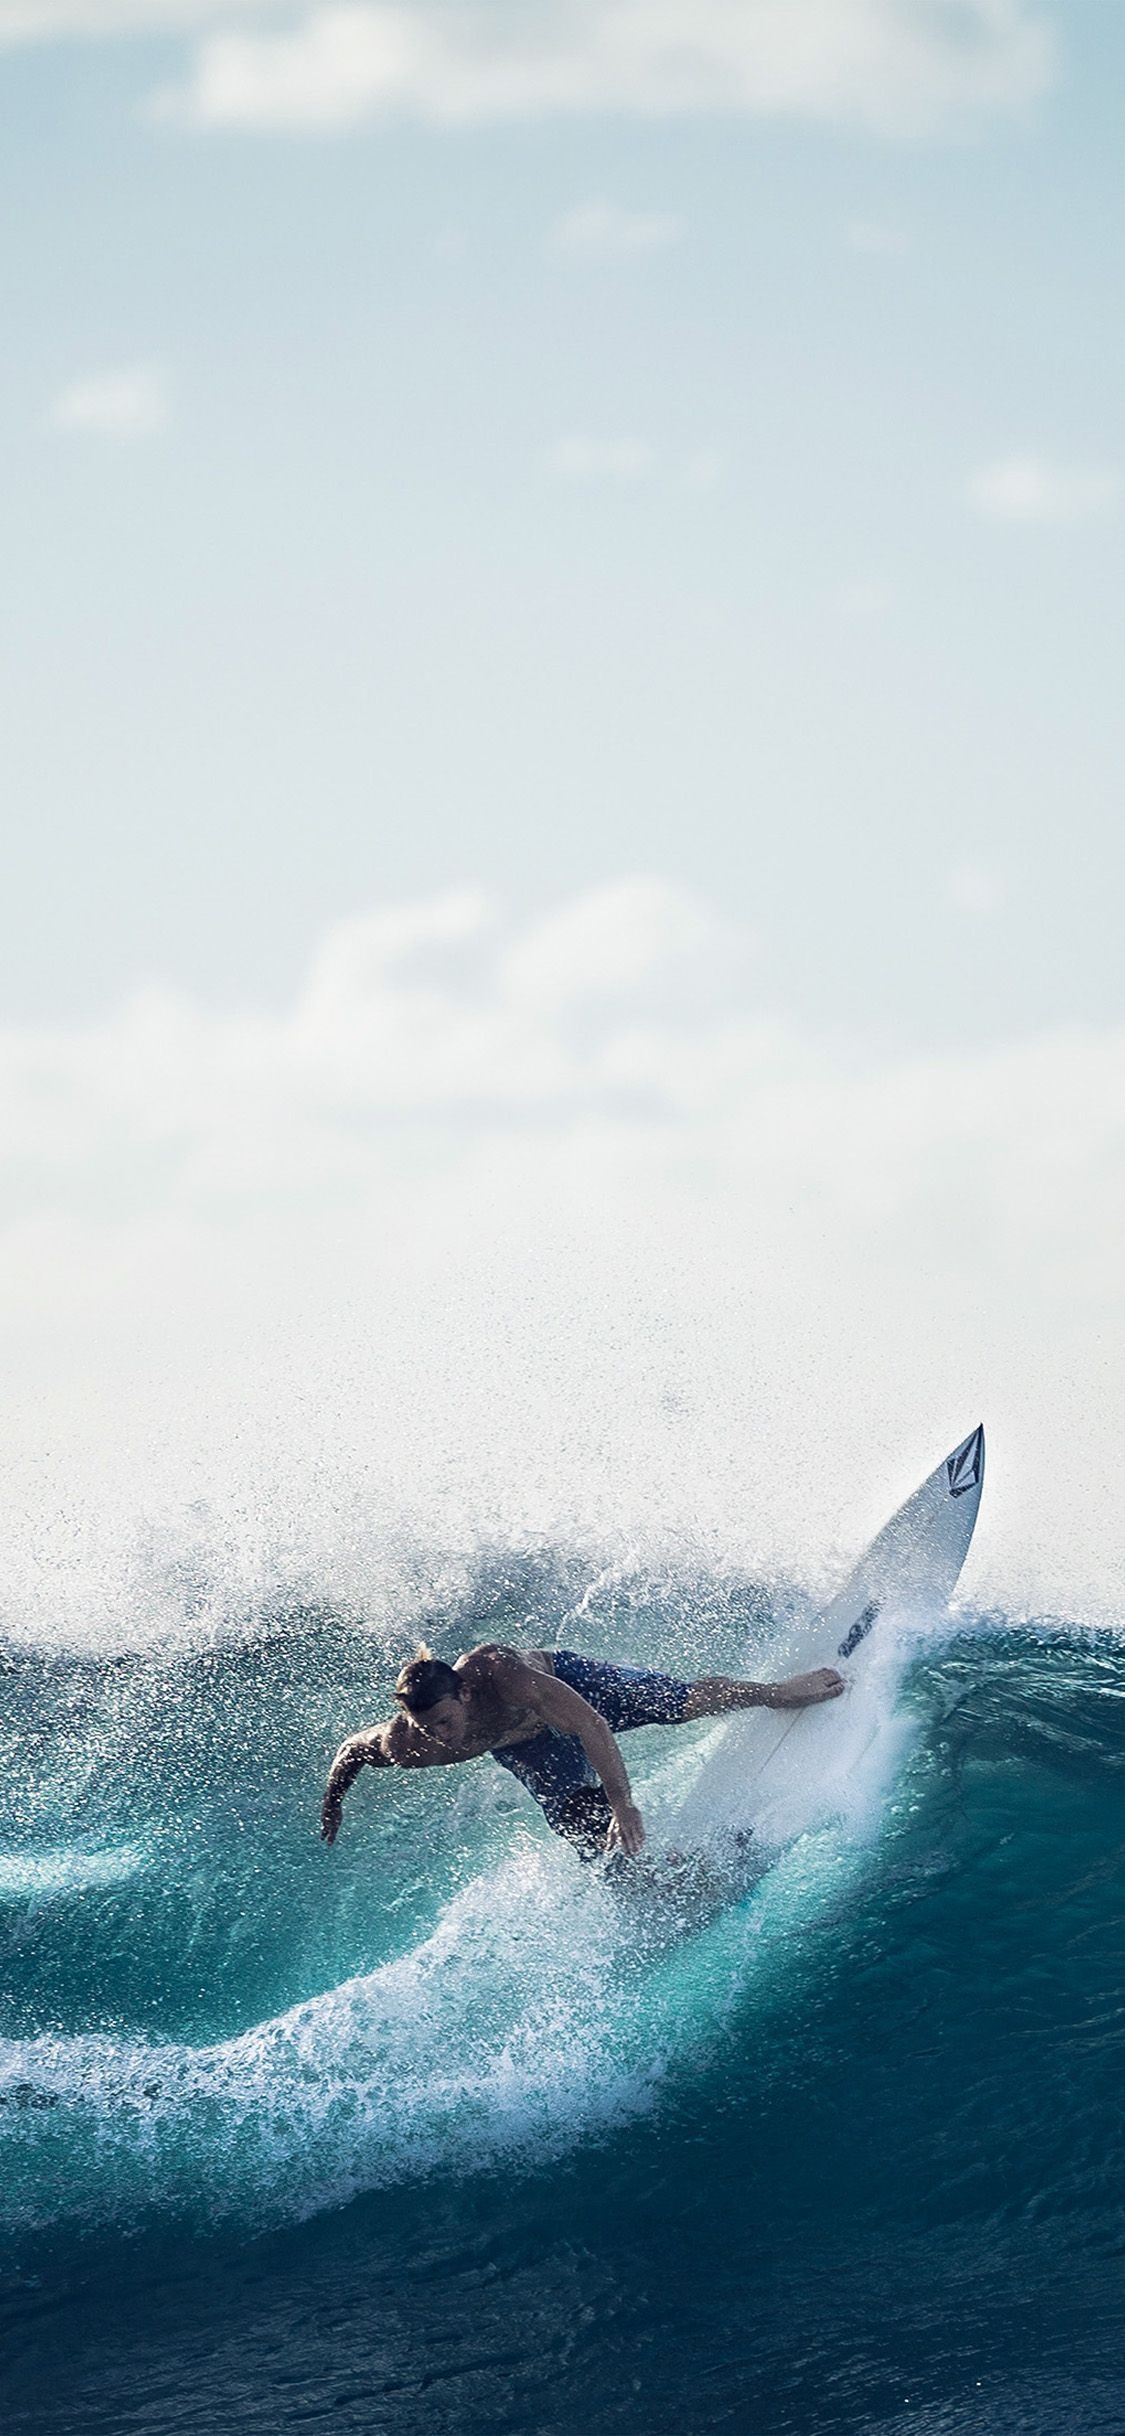 Surfing wallpapers for iPhone, Mobile surf inspiration, Beach vibes, On-the-go, 1130x2440 HD Phone